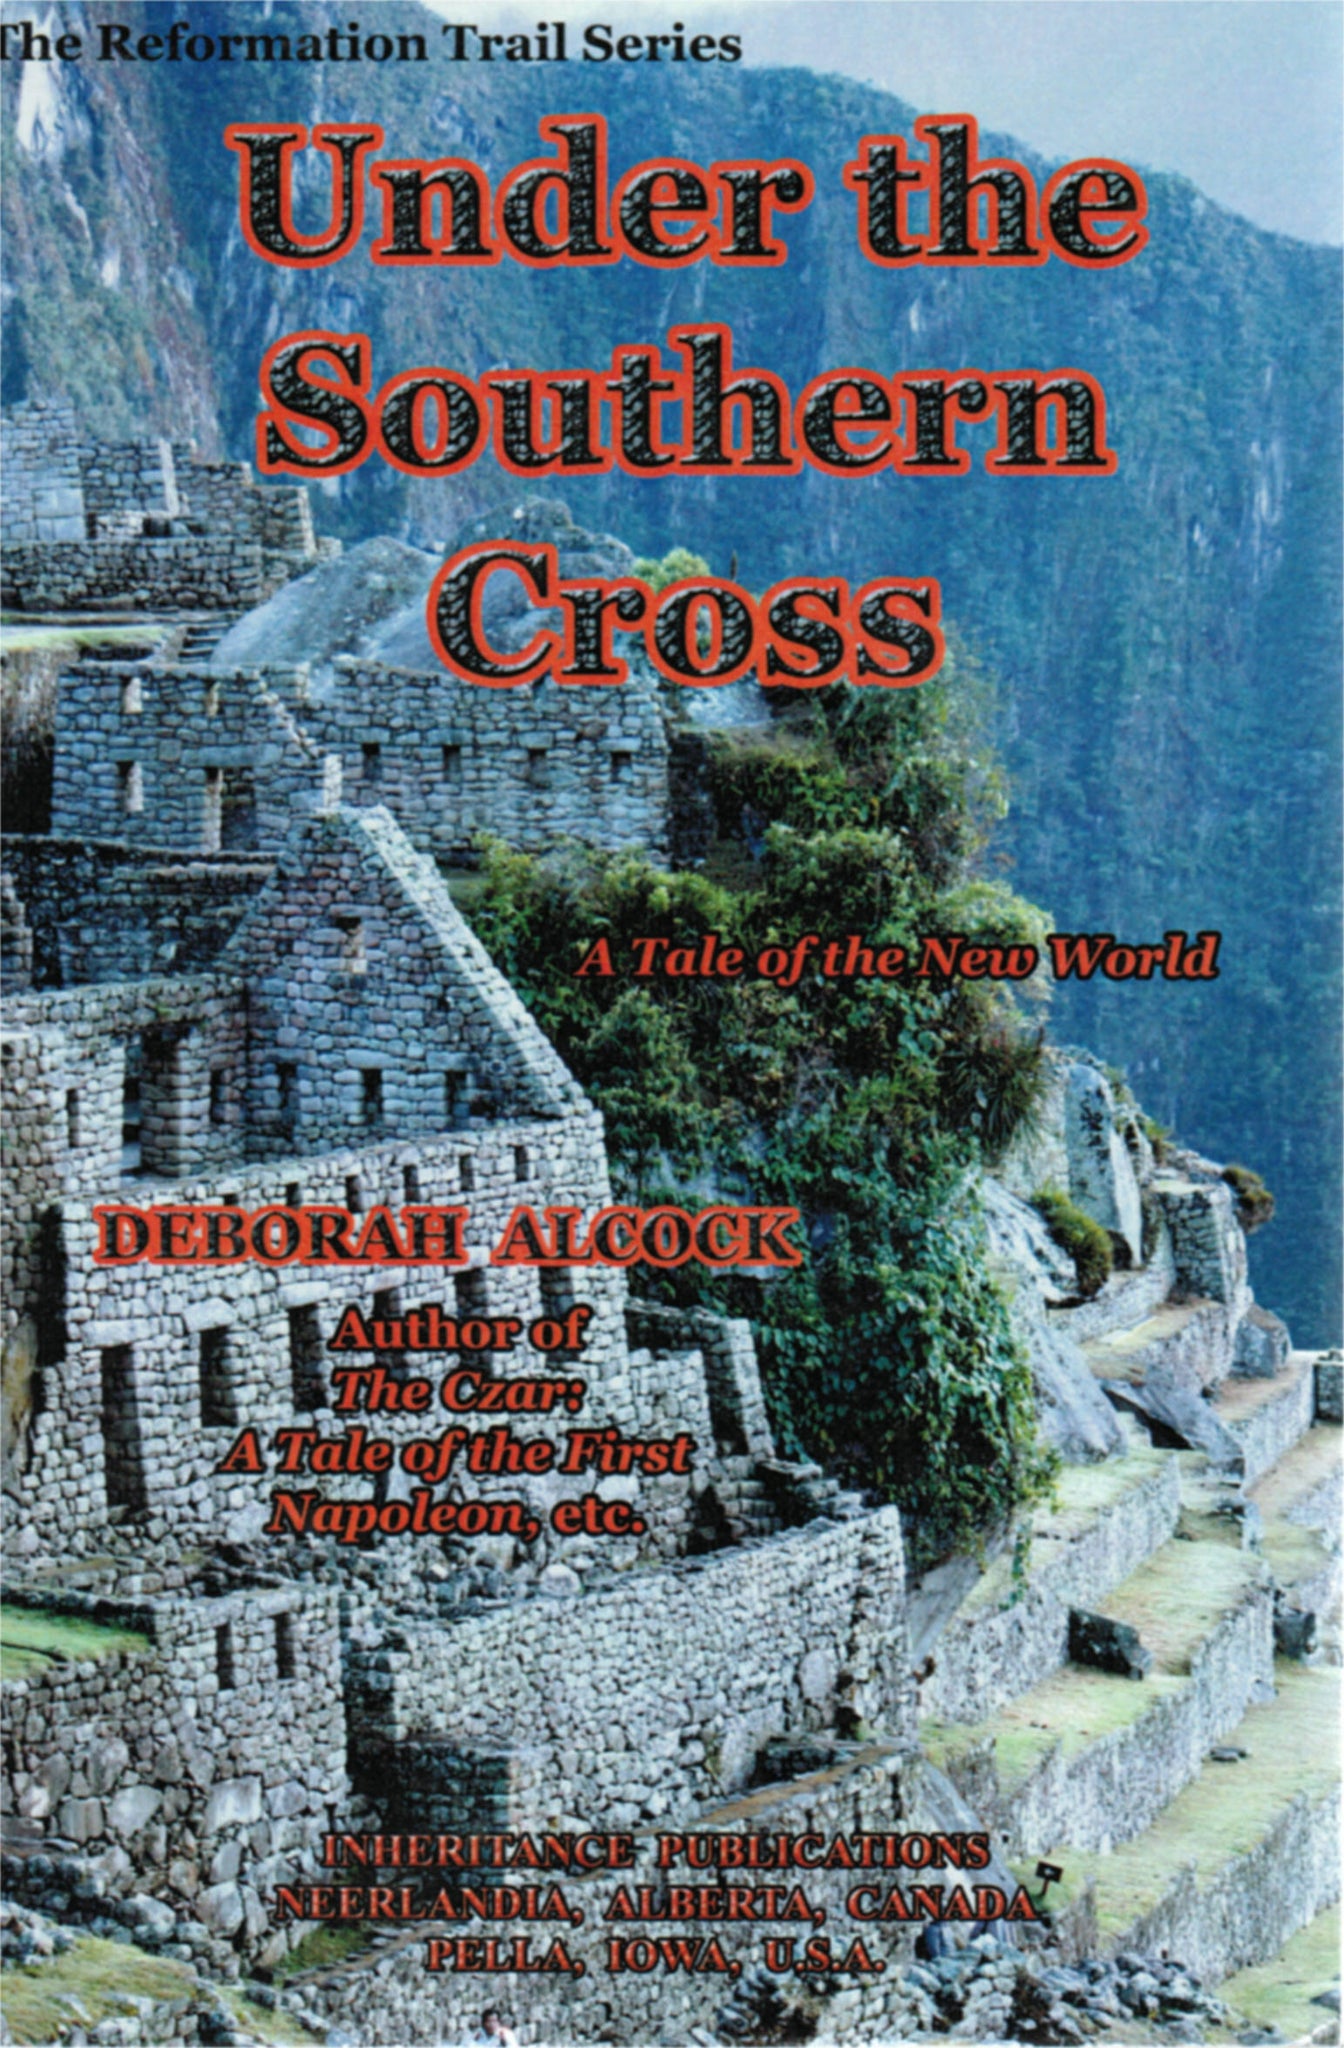 The Reformation Trail Series #16 - Under the Southern Cross: A Tale of the New World